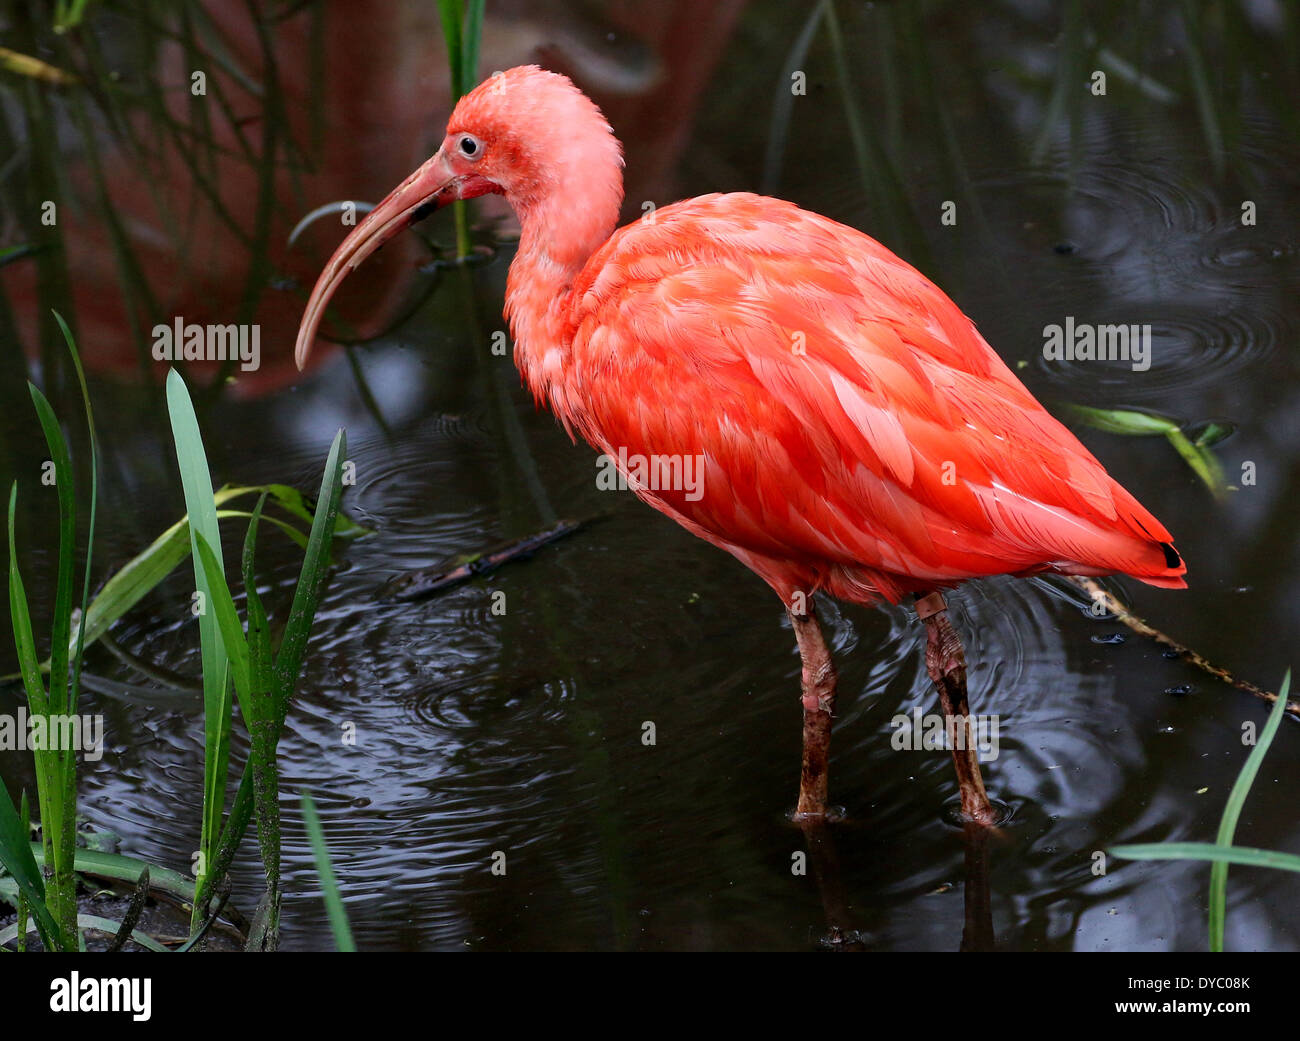 Close-up of a South American Scarlet Ibis (Eudocimus ruber) foraging in a lake Stock Photo